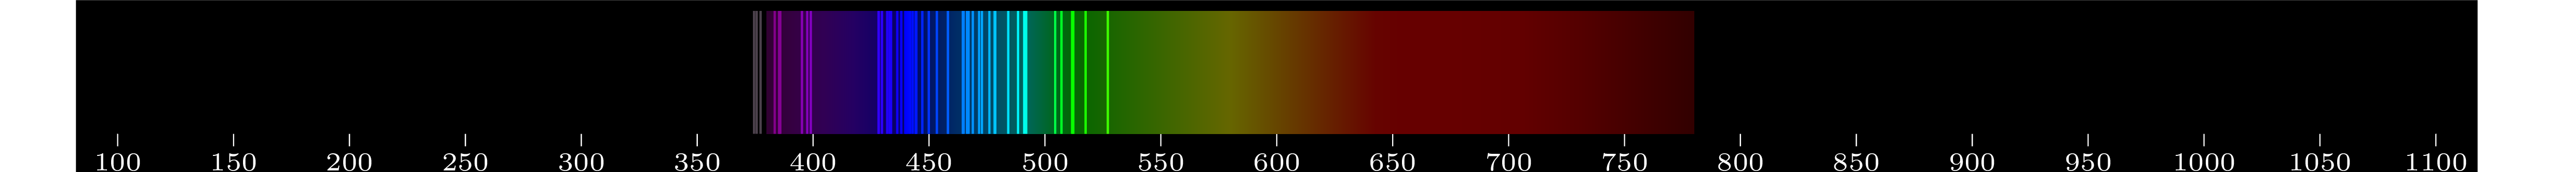 emmision spectra of element Sm